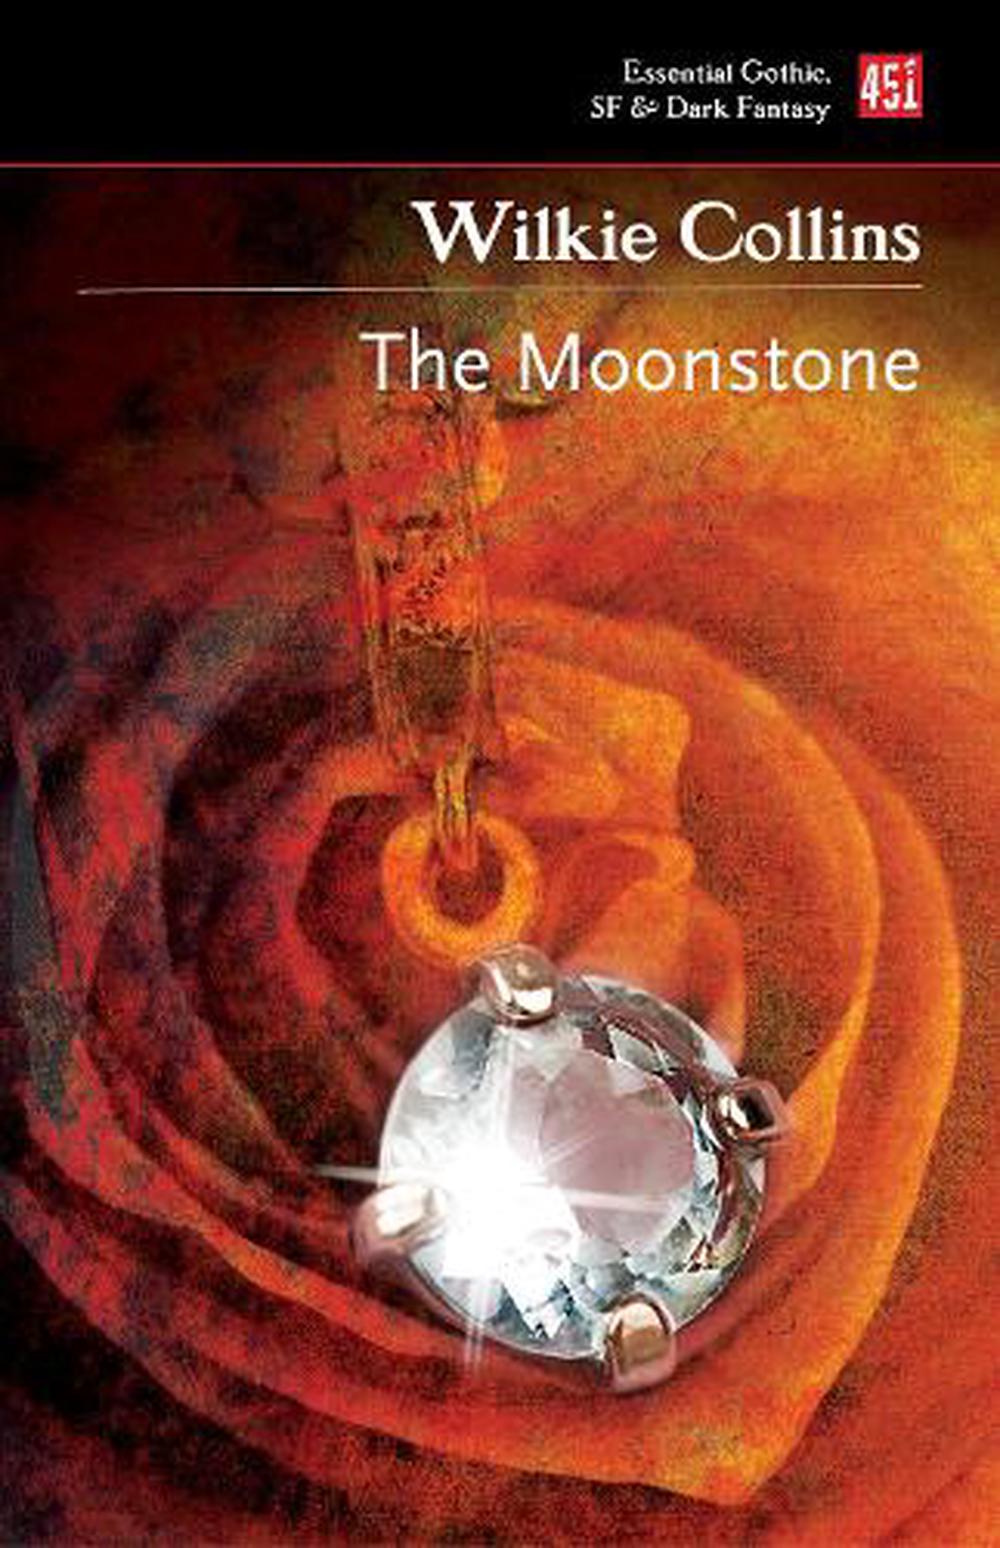 The Moonstone by Wilkie Collins (English) Paperback Book Free Shipping